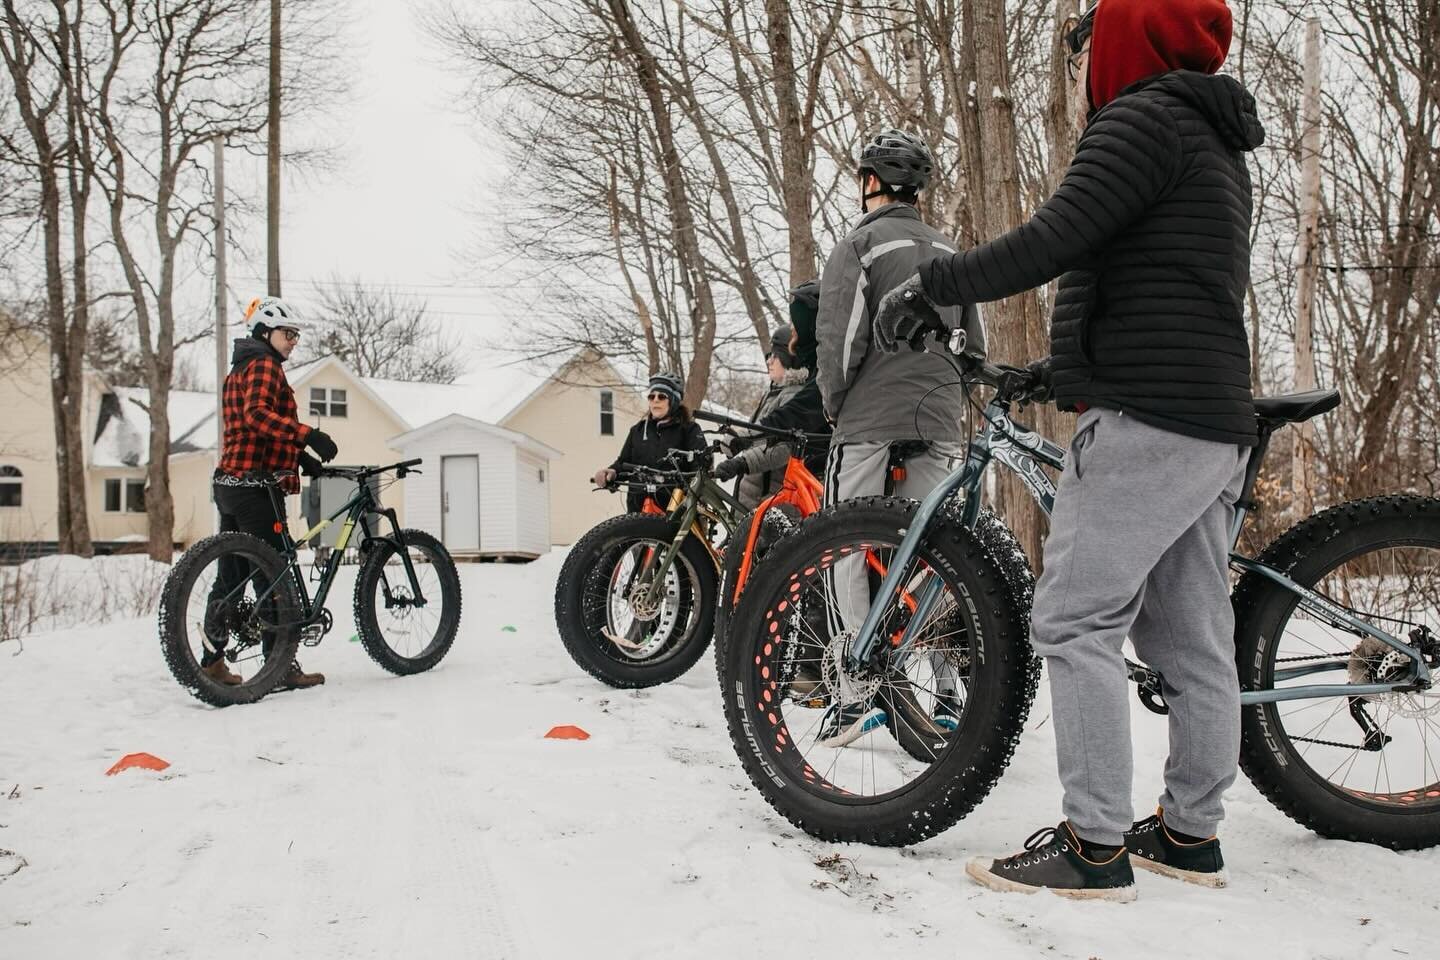 Learn to Winter Bike with Meridian63&deg; MTB! 🚲 ⛄️ @exploresummerside 

Get free instruction on how to enjoy the winter with fat bike riding. Certified instructors from Meridian63&deg; MTB will teach you what you need to know to get introduced to t